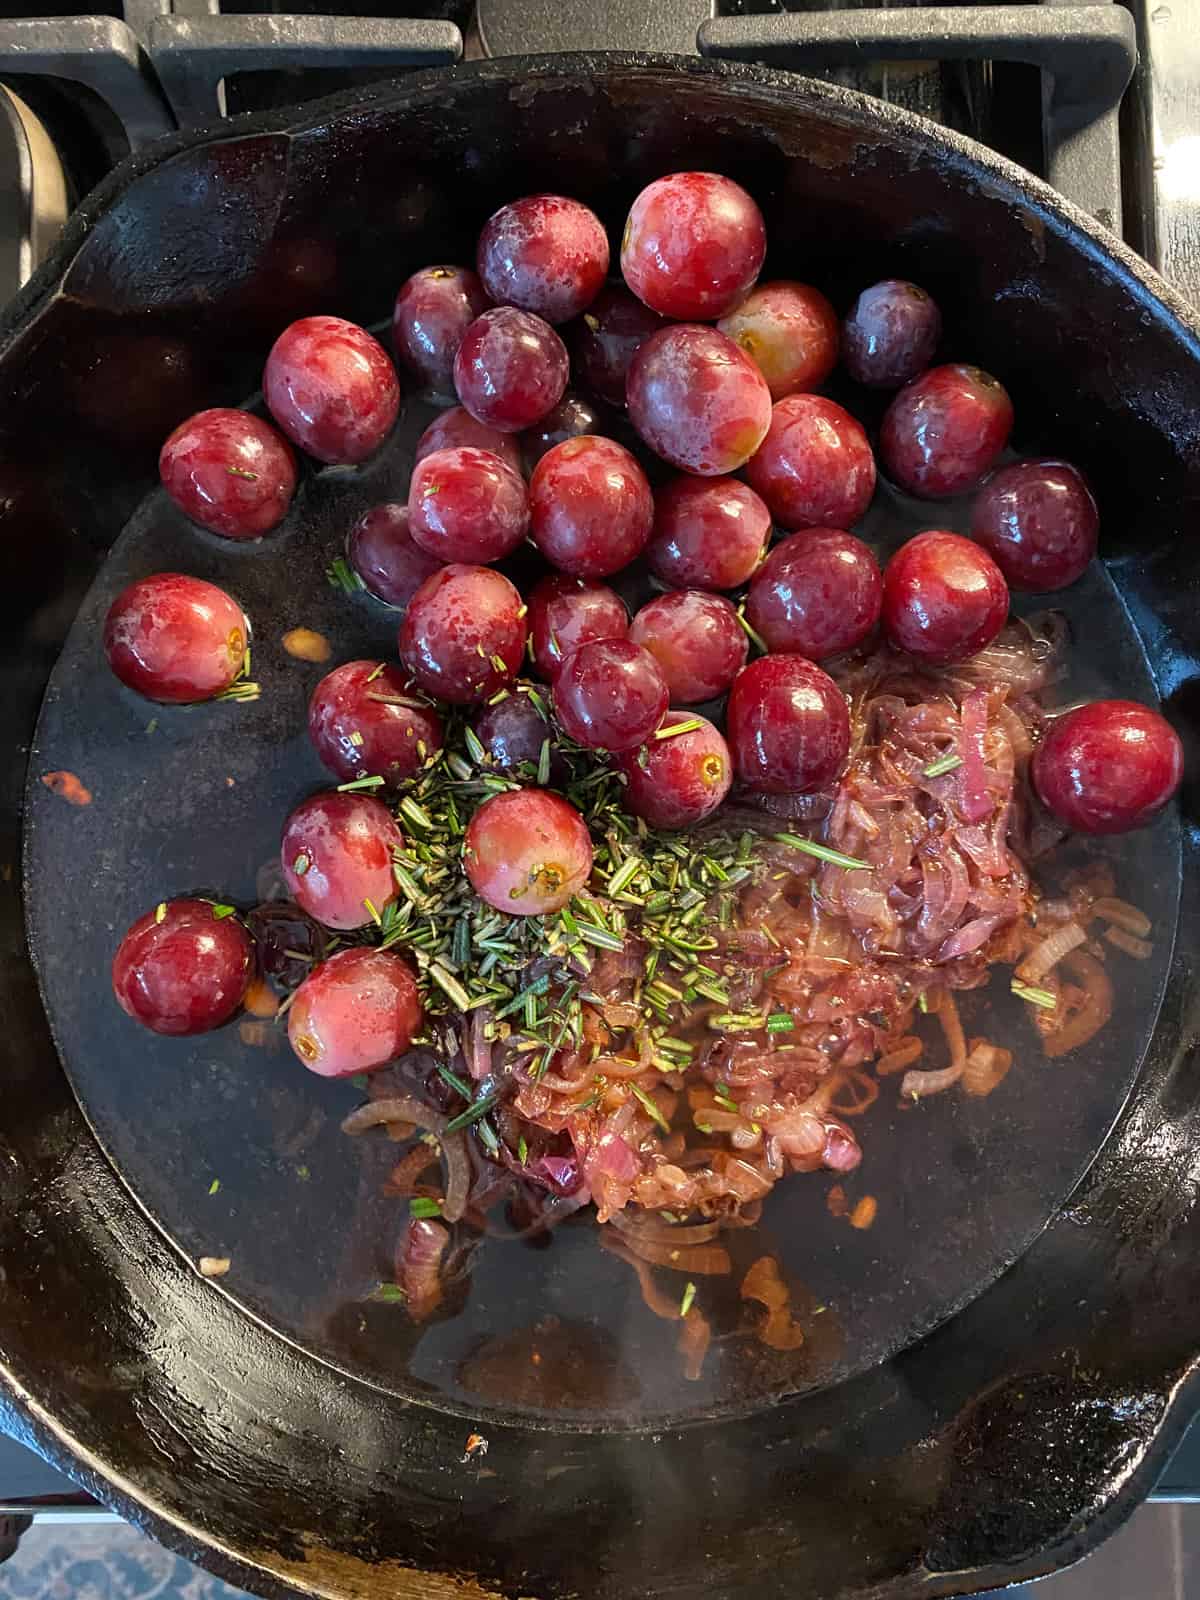 Simmering grapes, caramelized onions, and rosemary in cooking wine and vegetable broth.